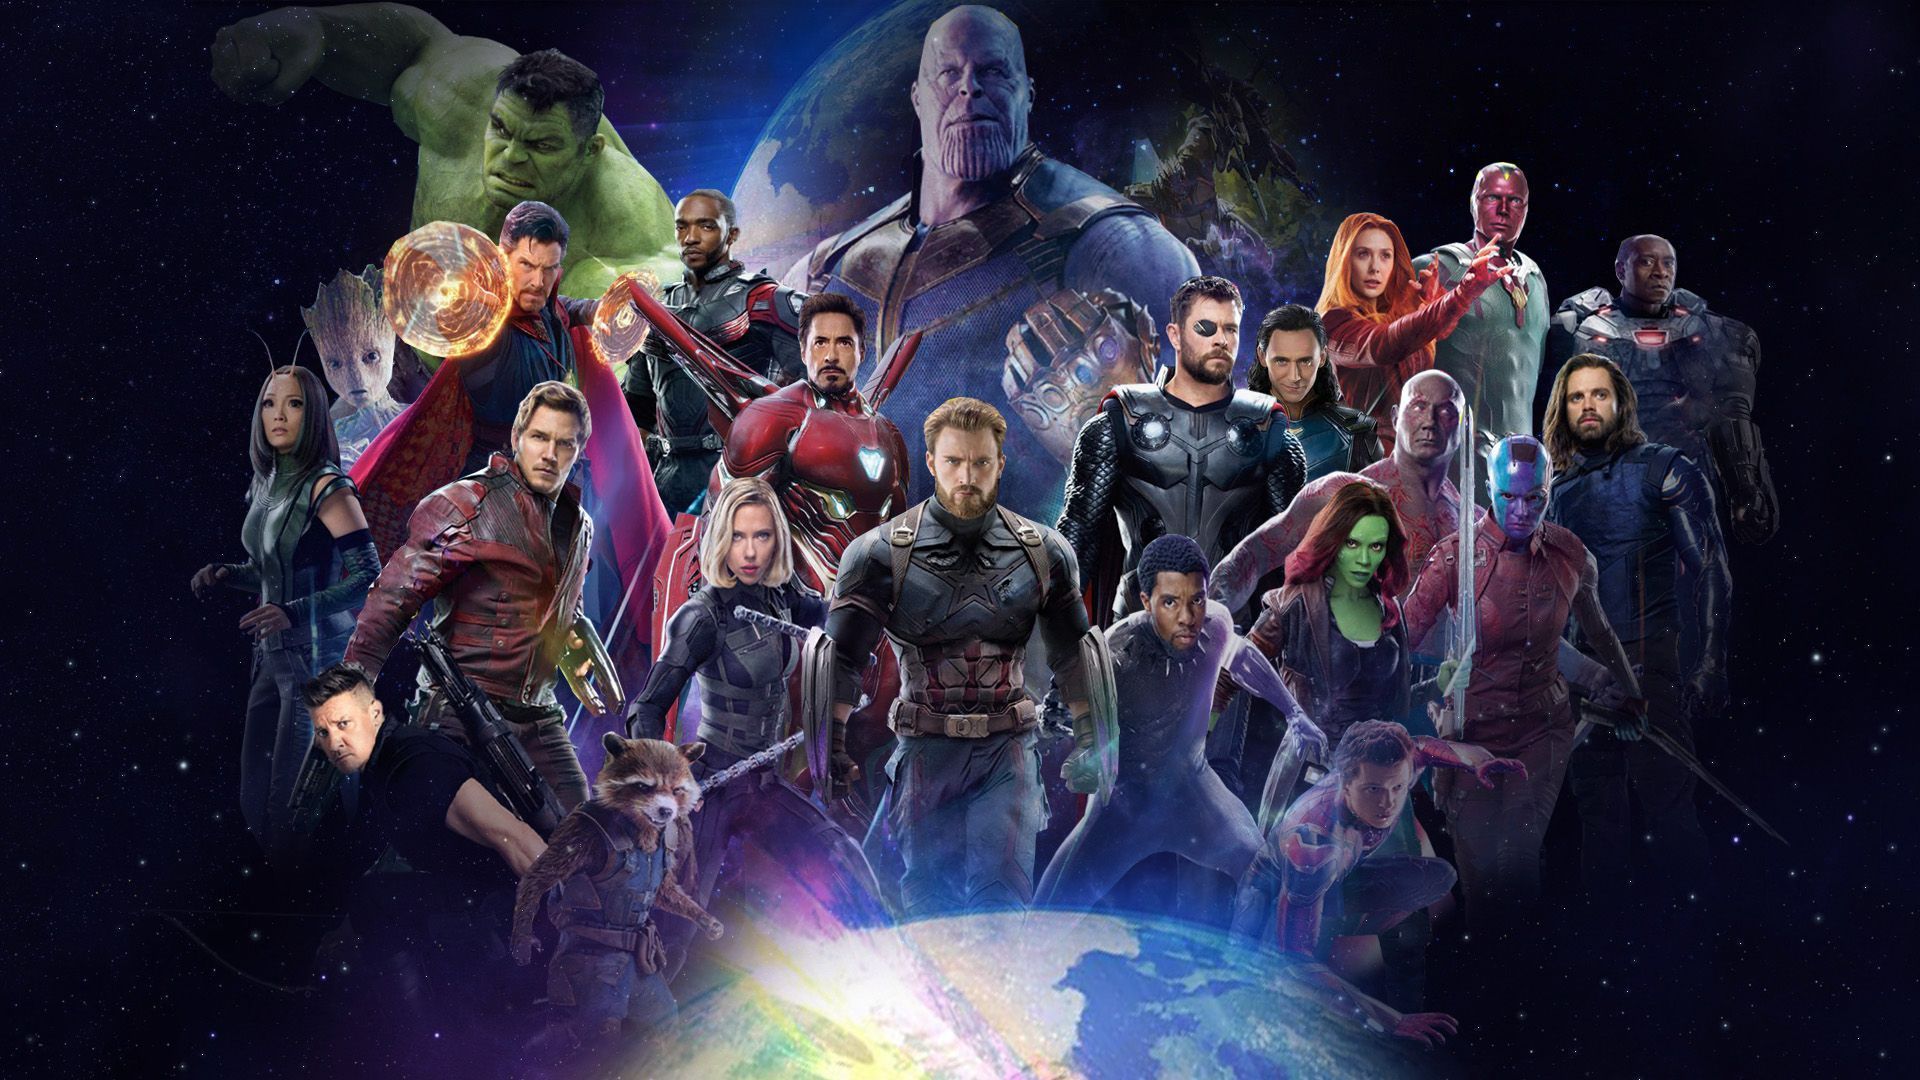 Avengers: Endgame - the most successful film of 2019 - Avengers